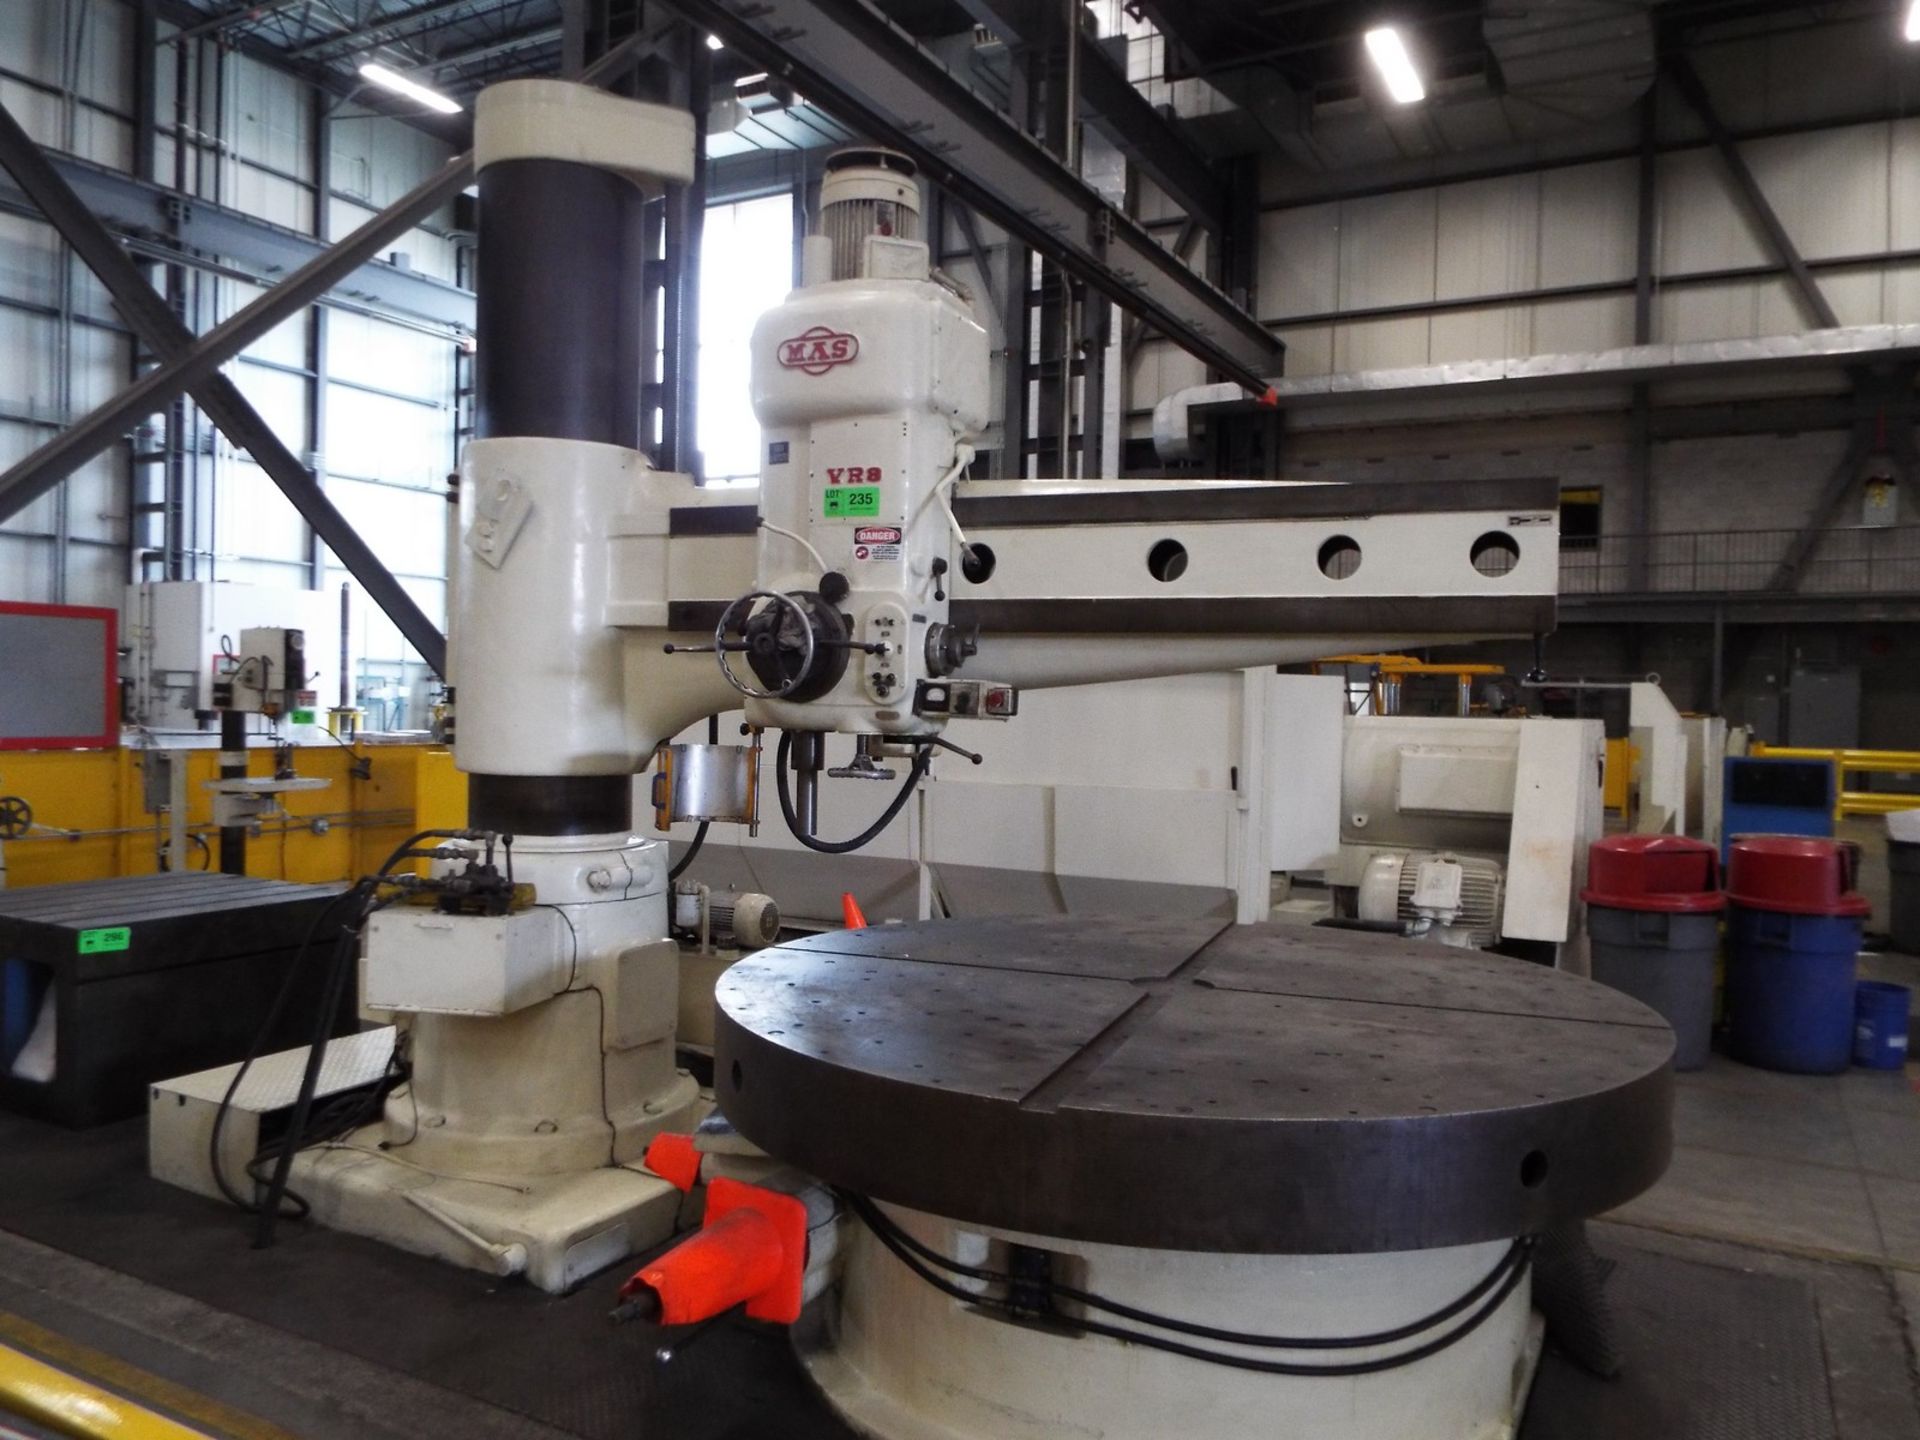 MAS VR8 RADIAL ARM DRILL WITH 8'6" ARM, 20" COLUMN, SPEEDS TO 1750 RPM, 48"X48"X30" BOX TABLE,